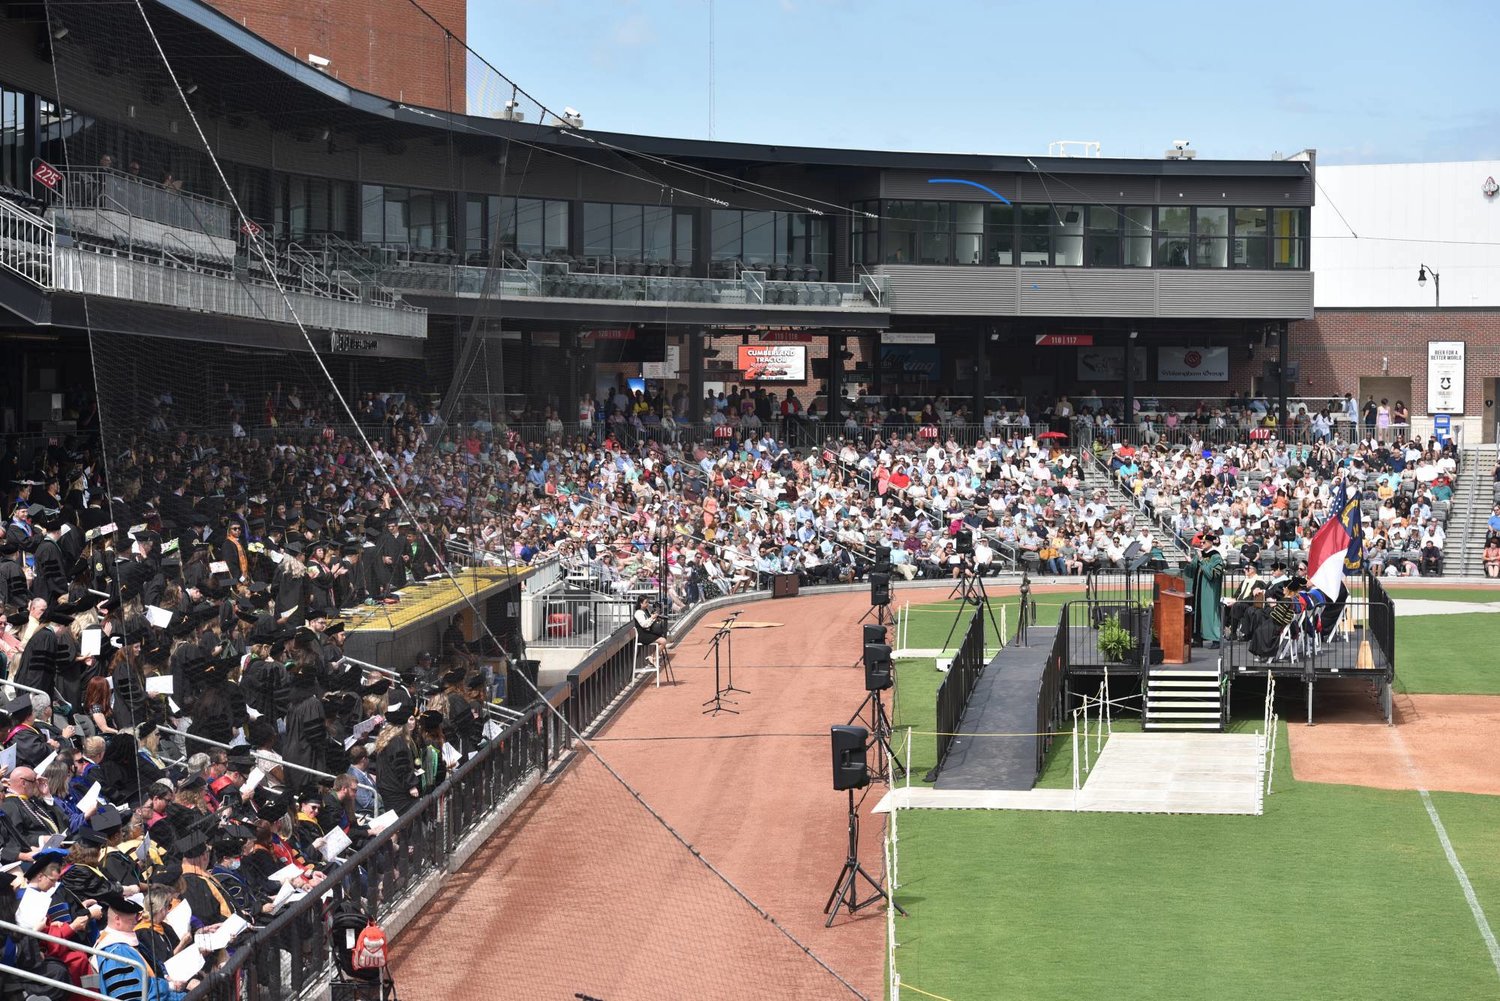 Methodist University held its 59th annual spring commencement ceremony Saturday at Segra Stadium in downtown Fayetteville. Nearly 300 graduates received their degrees.